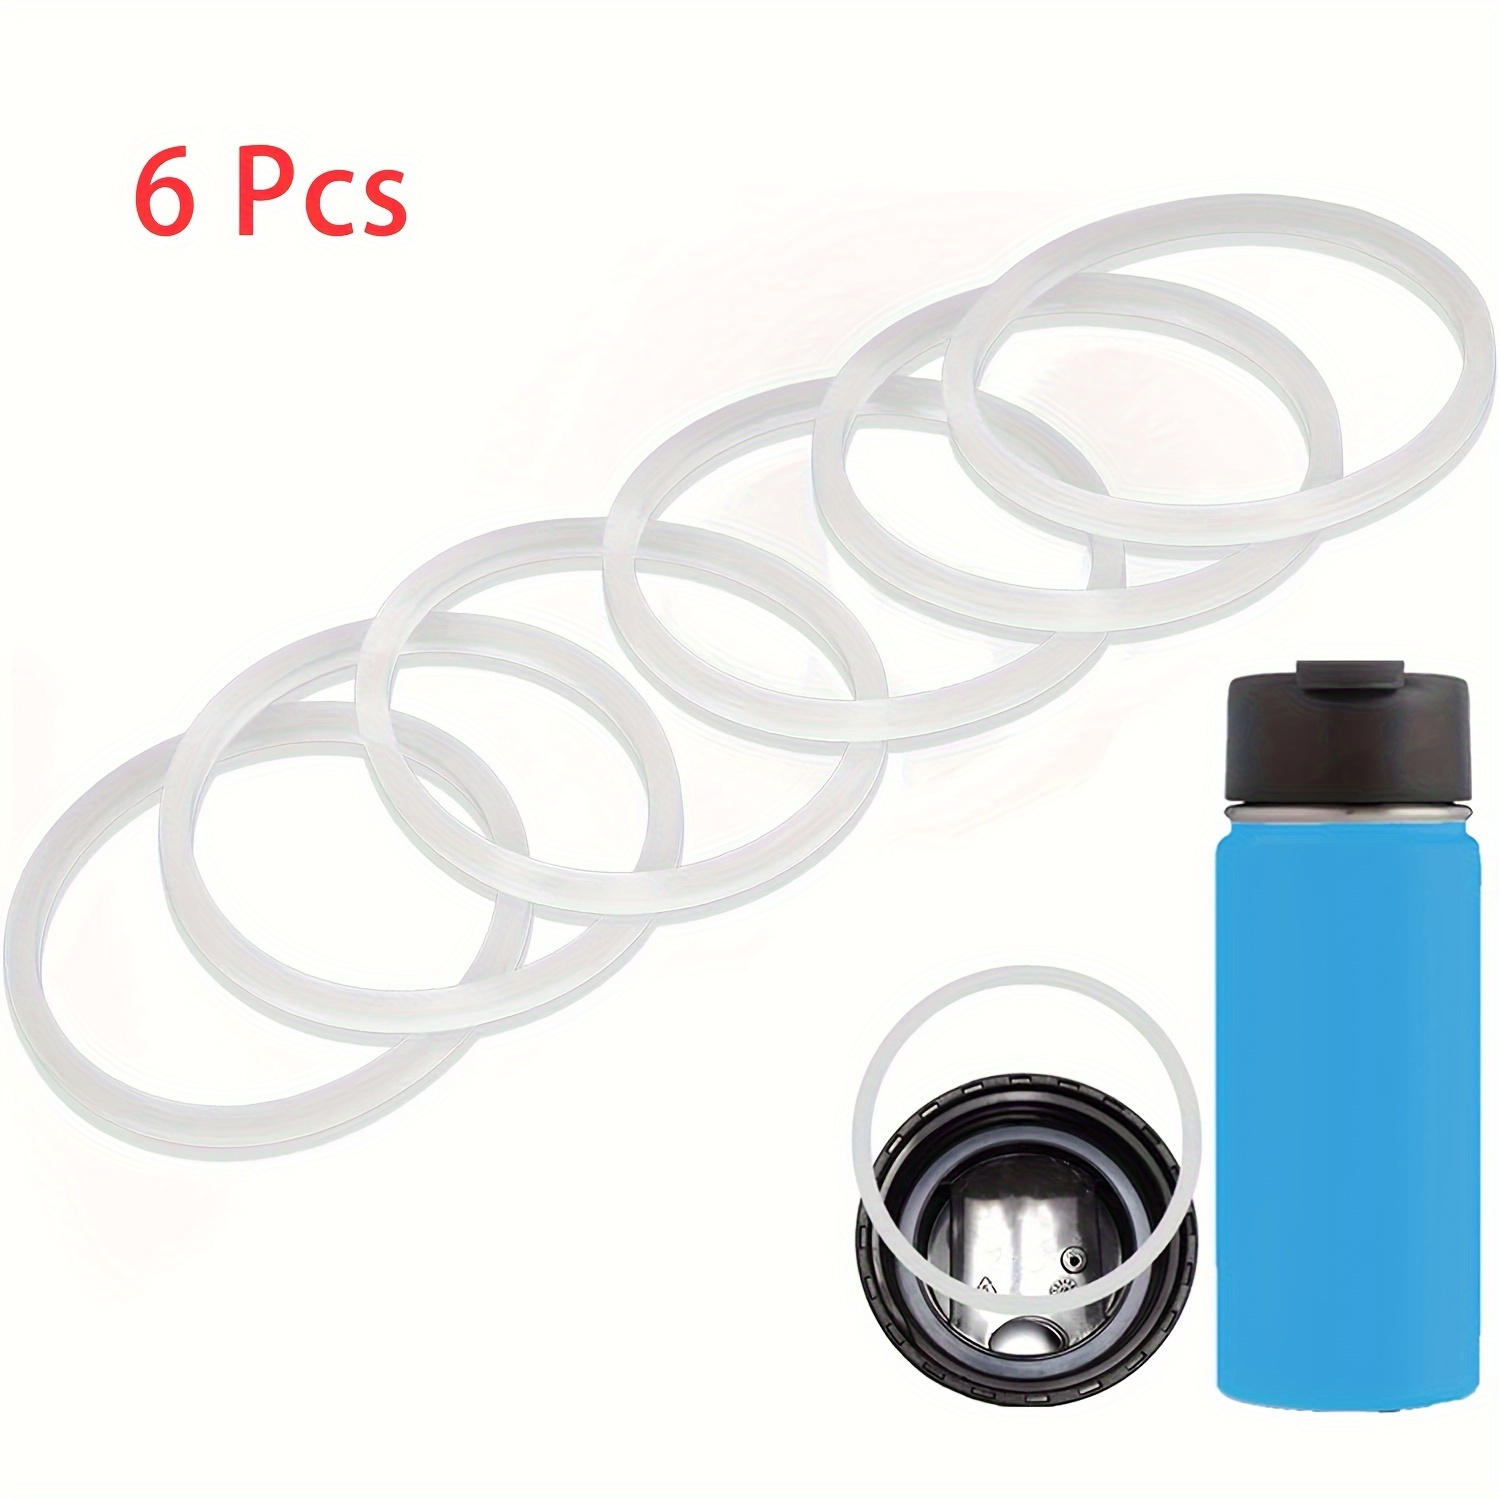 Get Thermos Silicone Gaskets & O-Rings to suit Thermos Lids